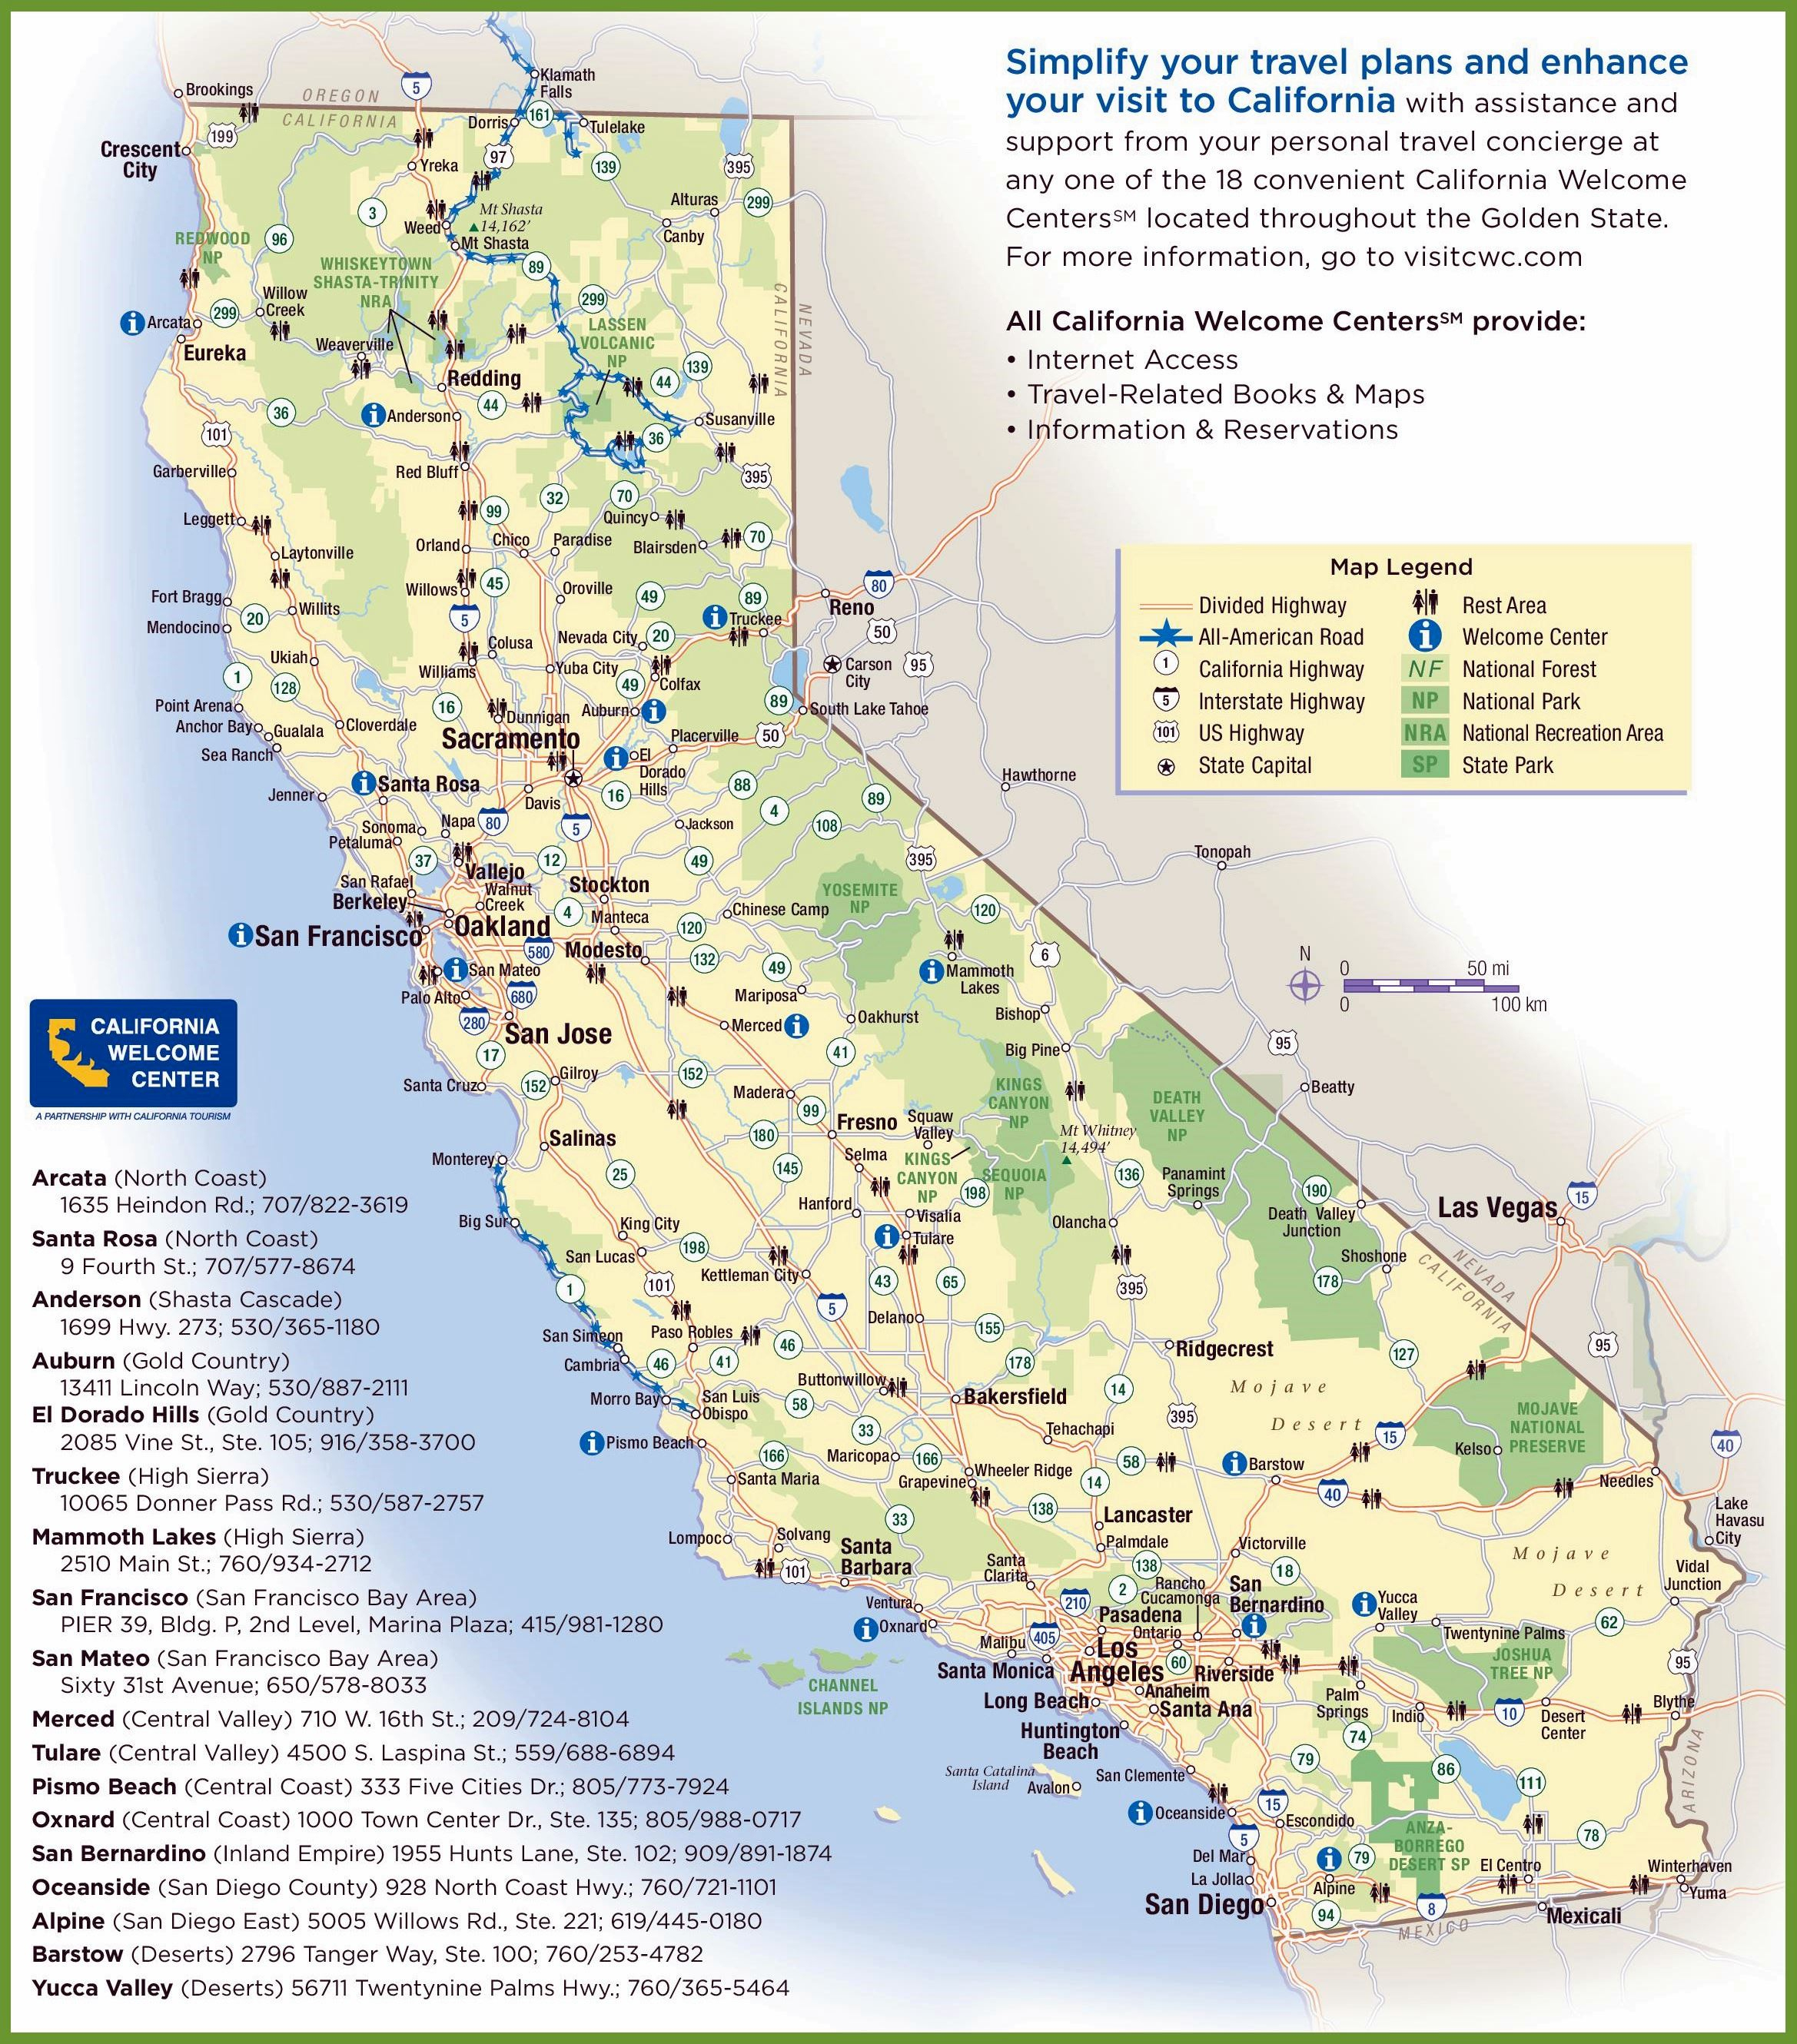 Large California Maps For Free Download And Print | High-Resolution - Southern California State Parks Map